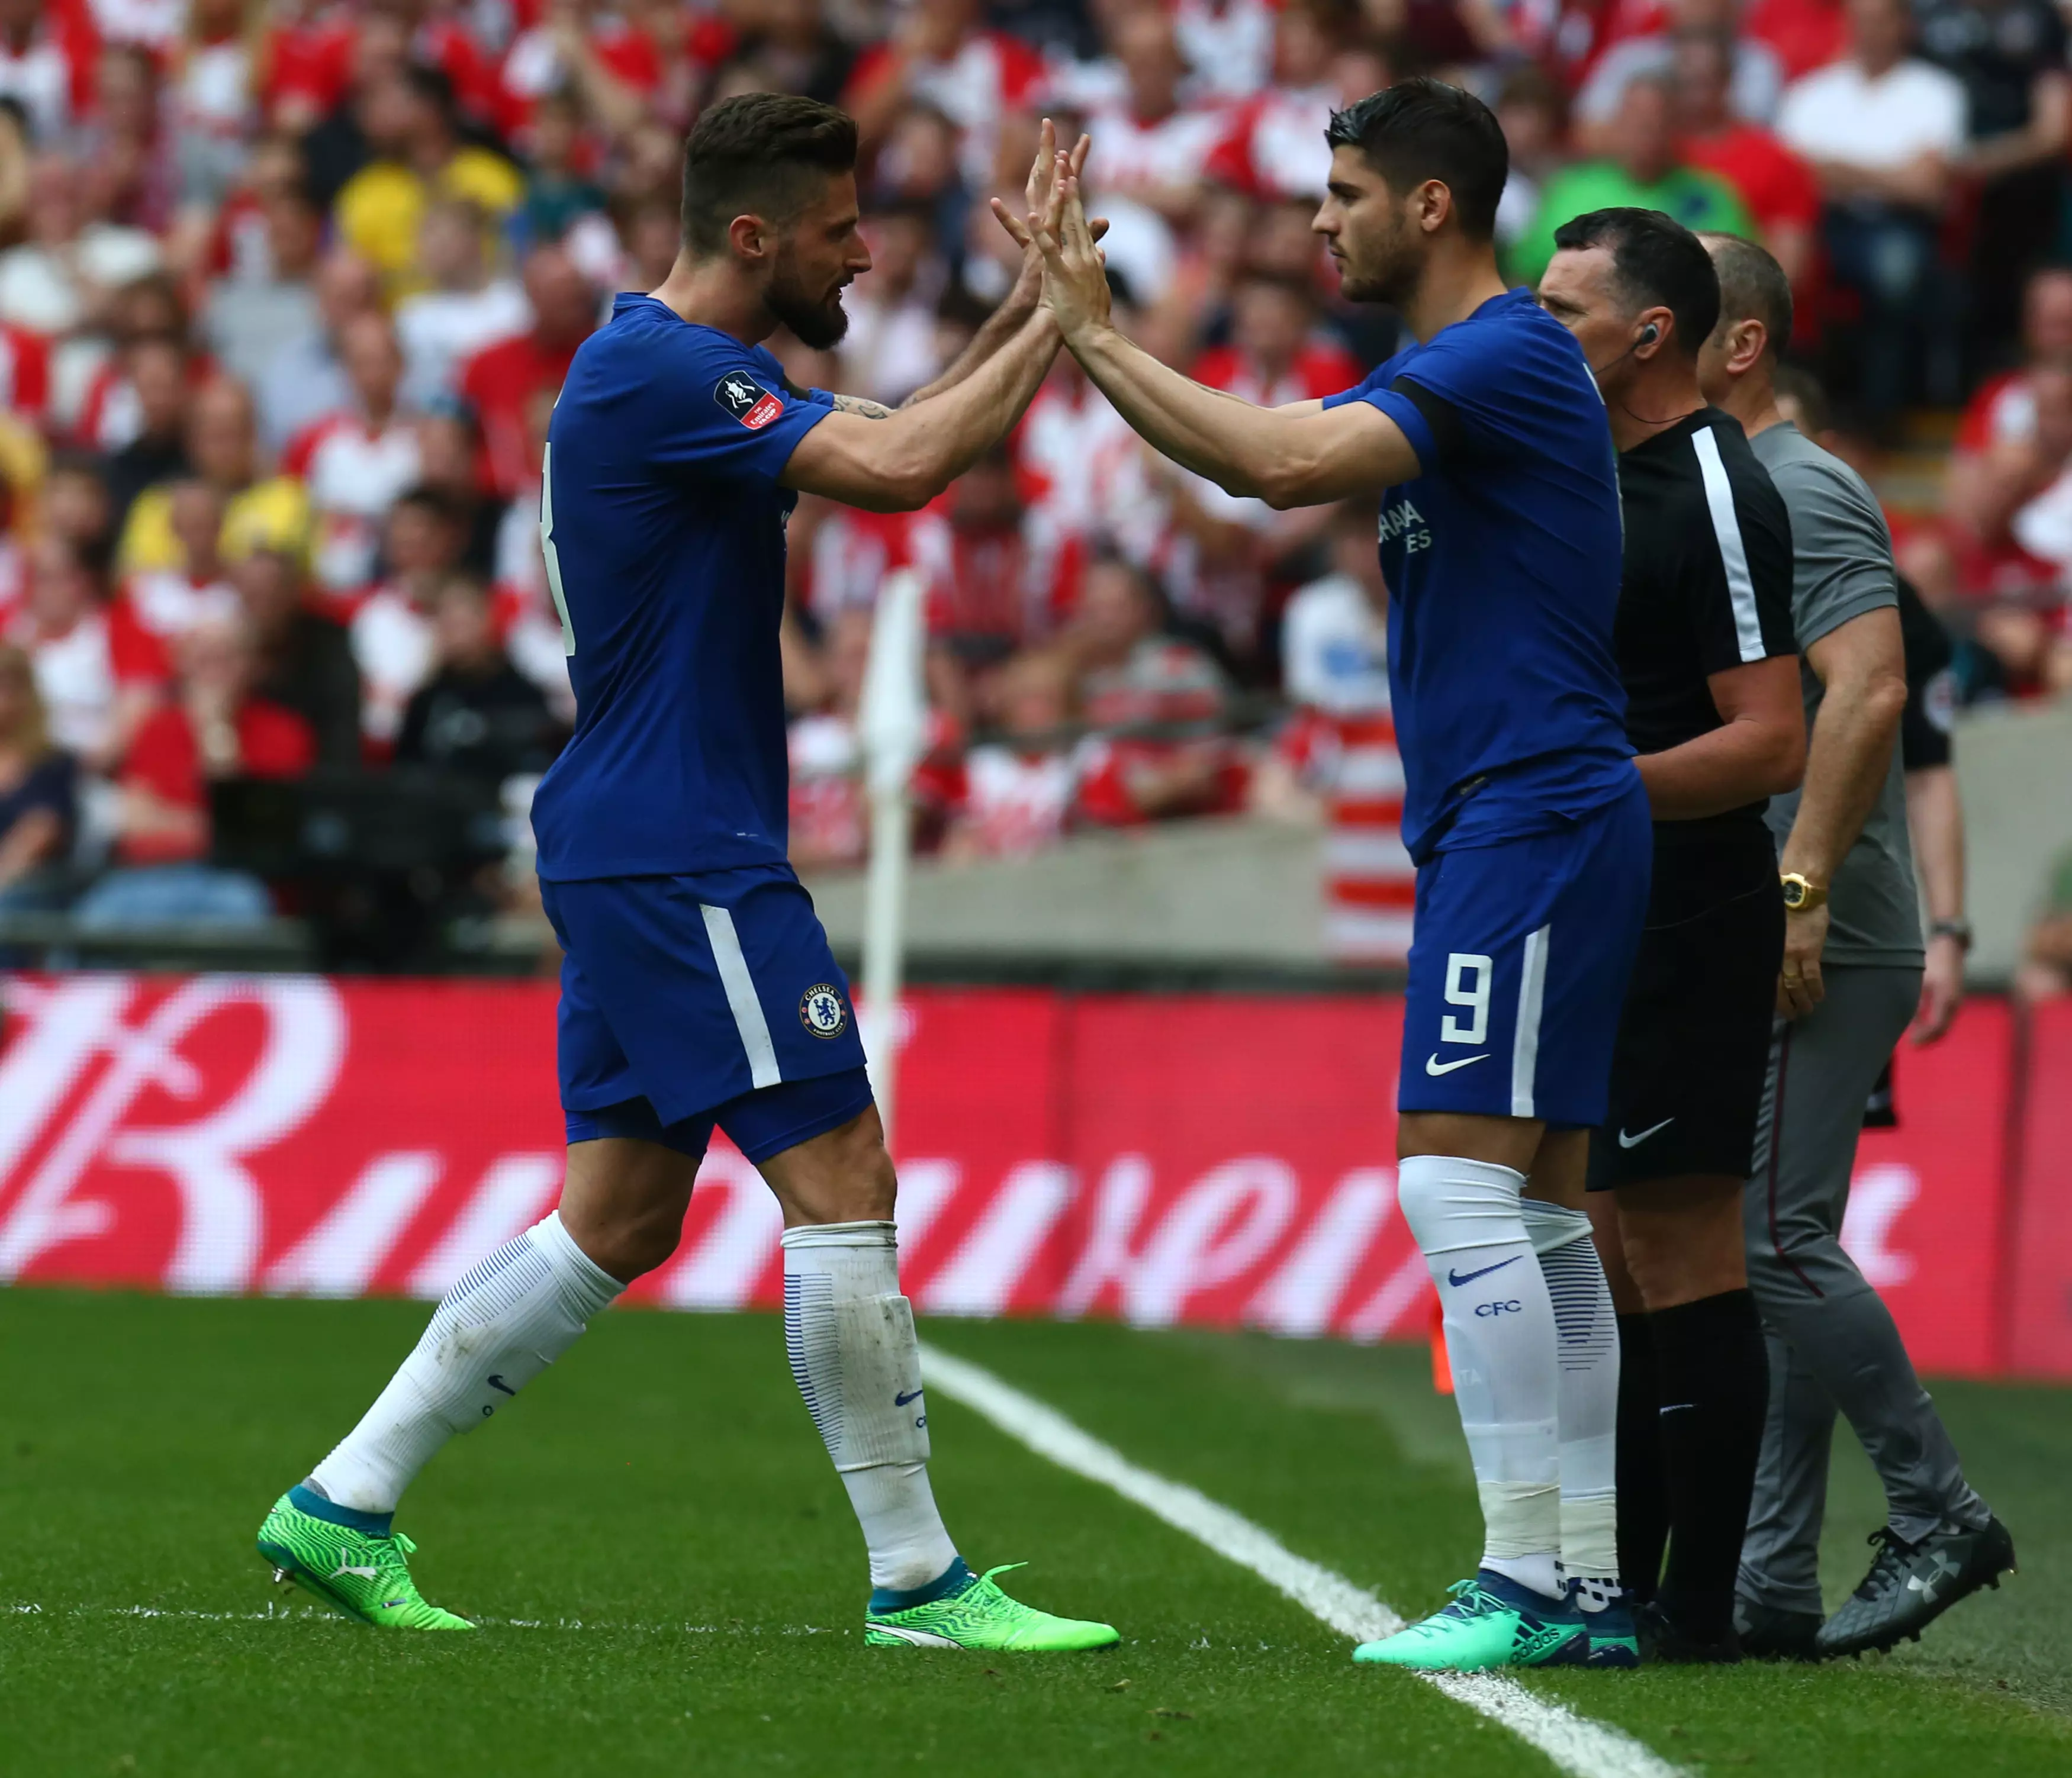 Morata and Giroud are Chelsea's first choice strikers. Image: PA Images